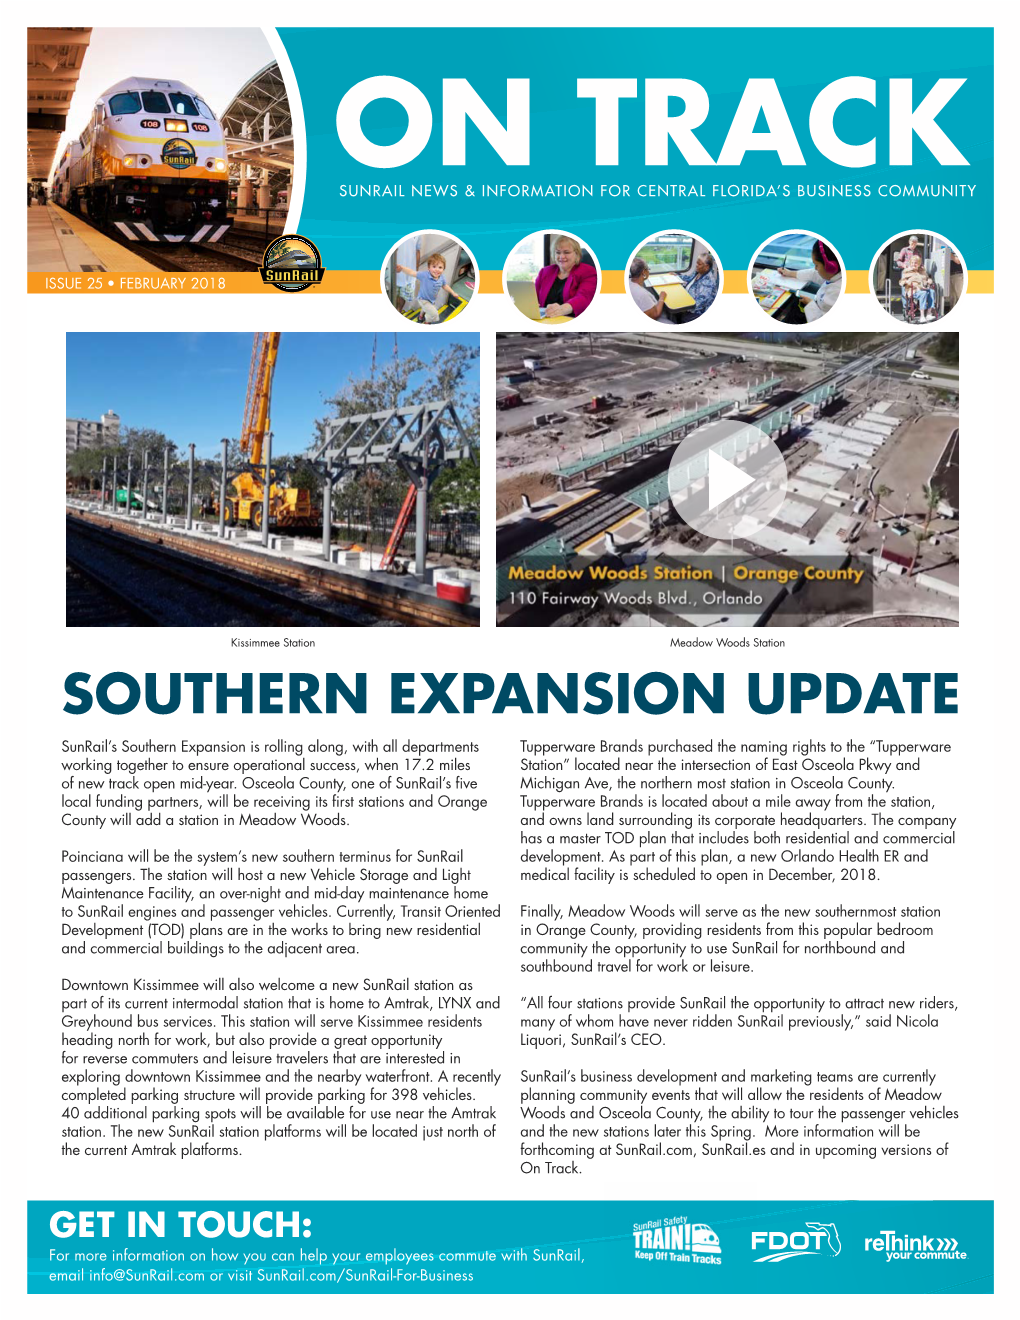 Southern Expansion Update